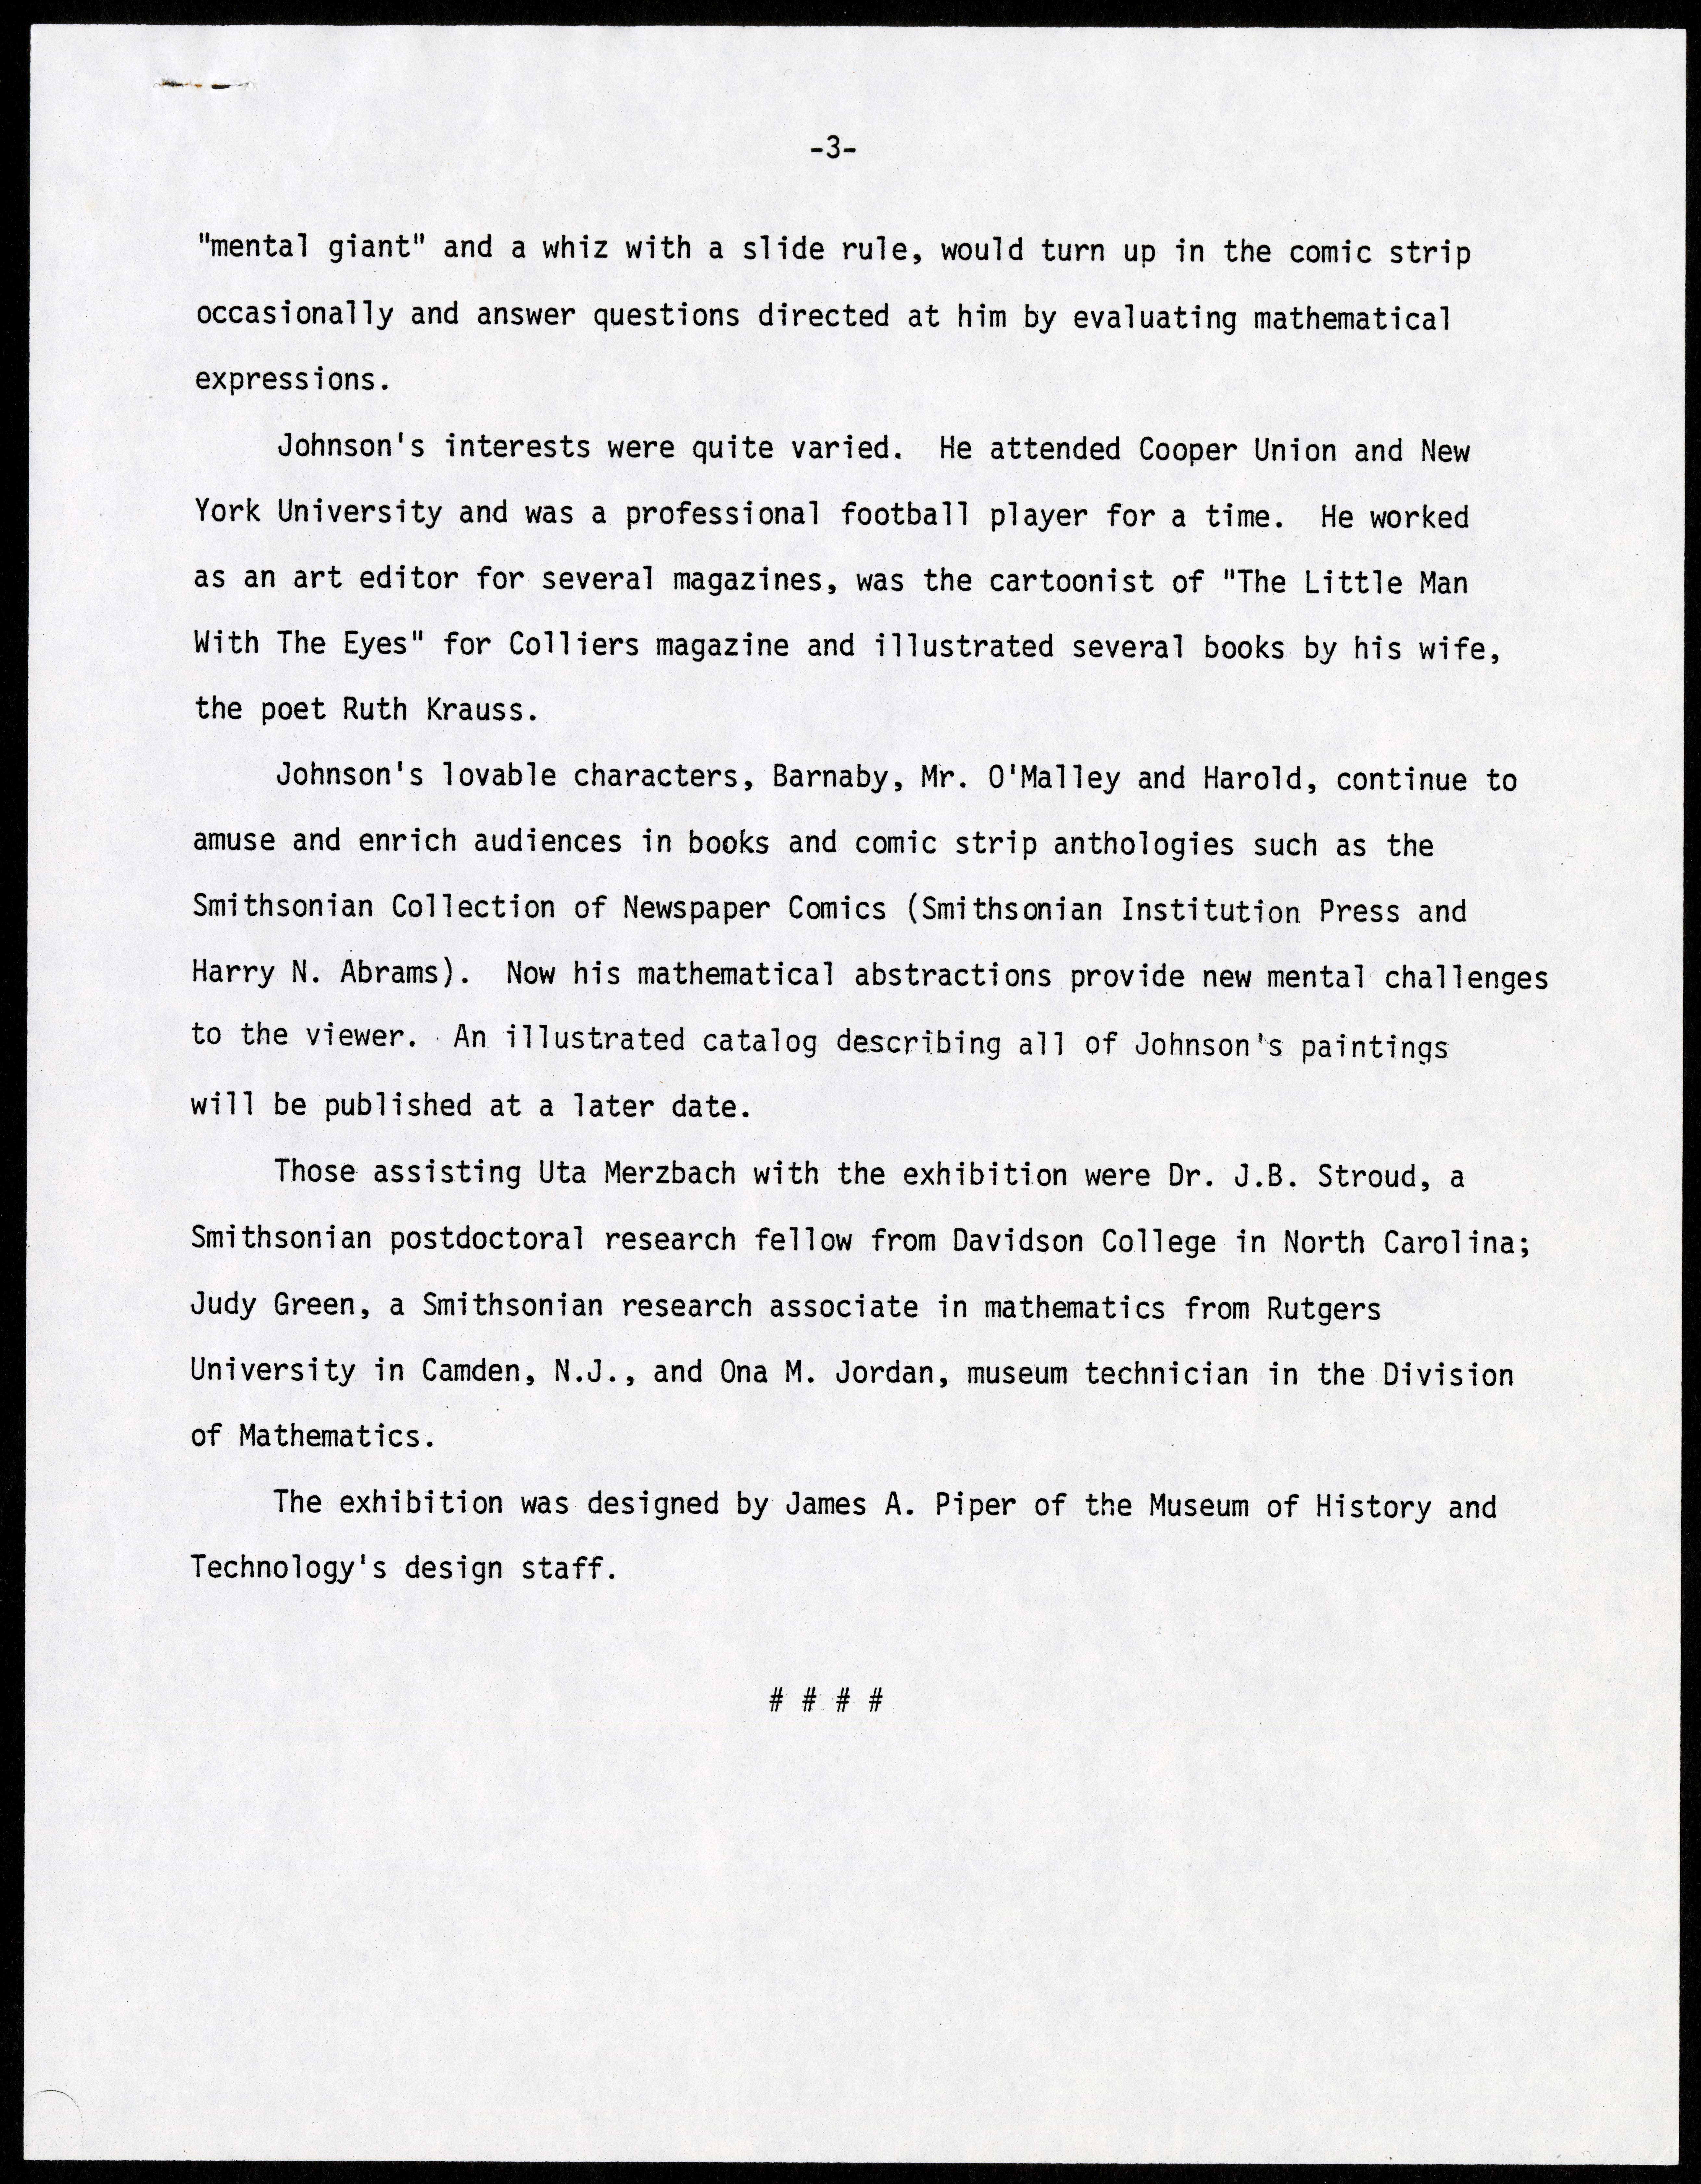 Scan of a type written document on white letter paper